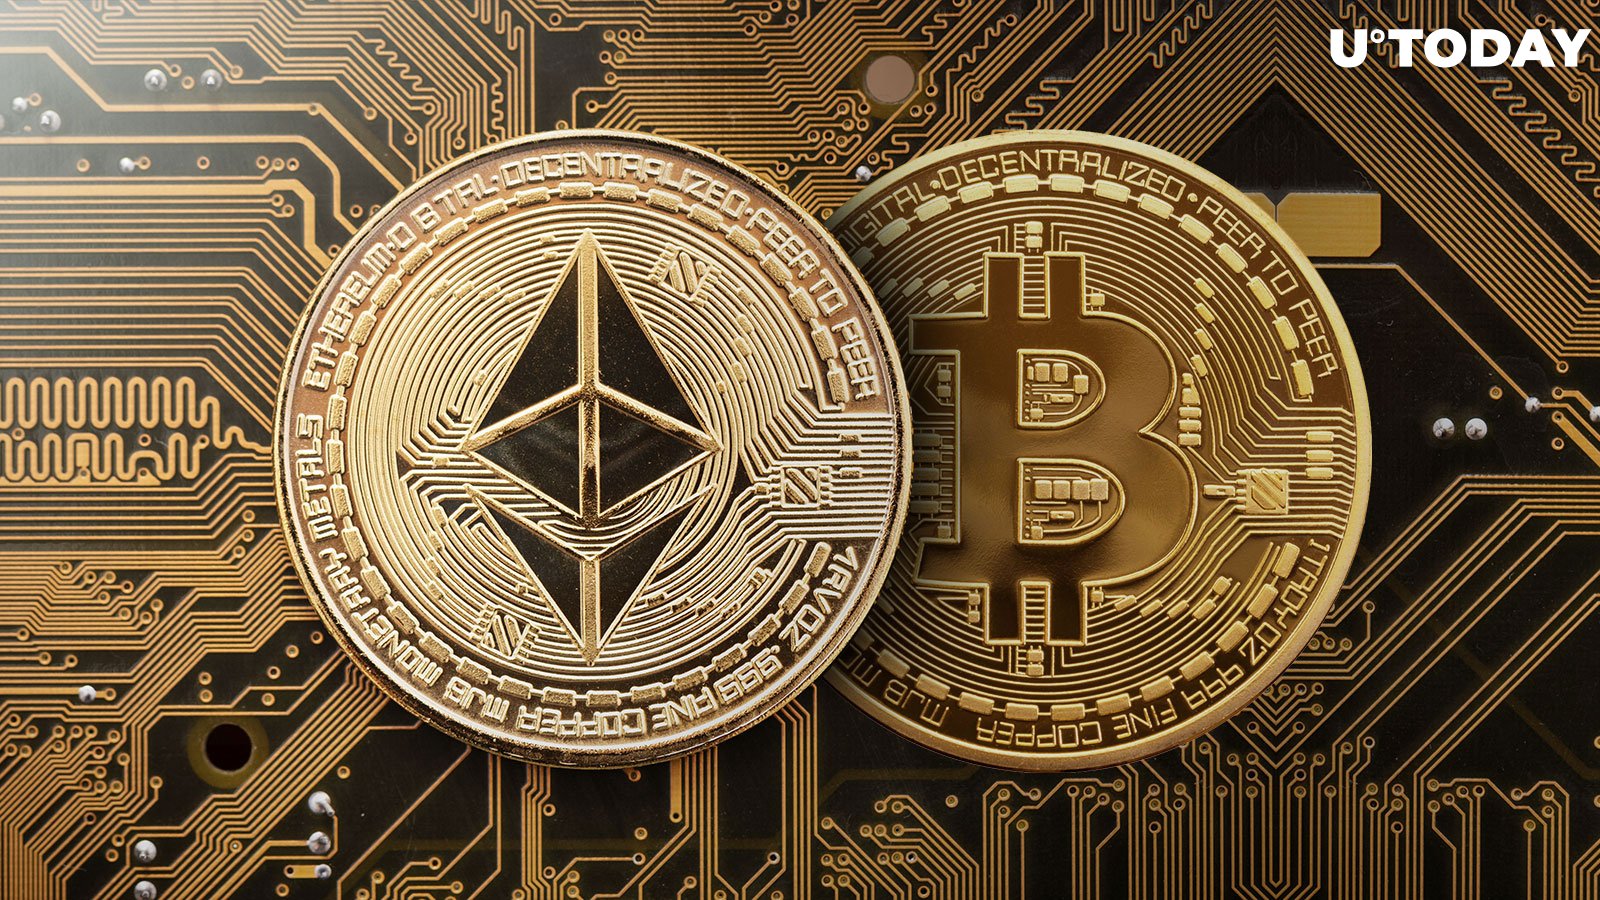 Crypto Options Alert: Bitcoin and Ethereum Prepare for Significant Expiration Event